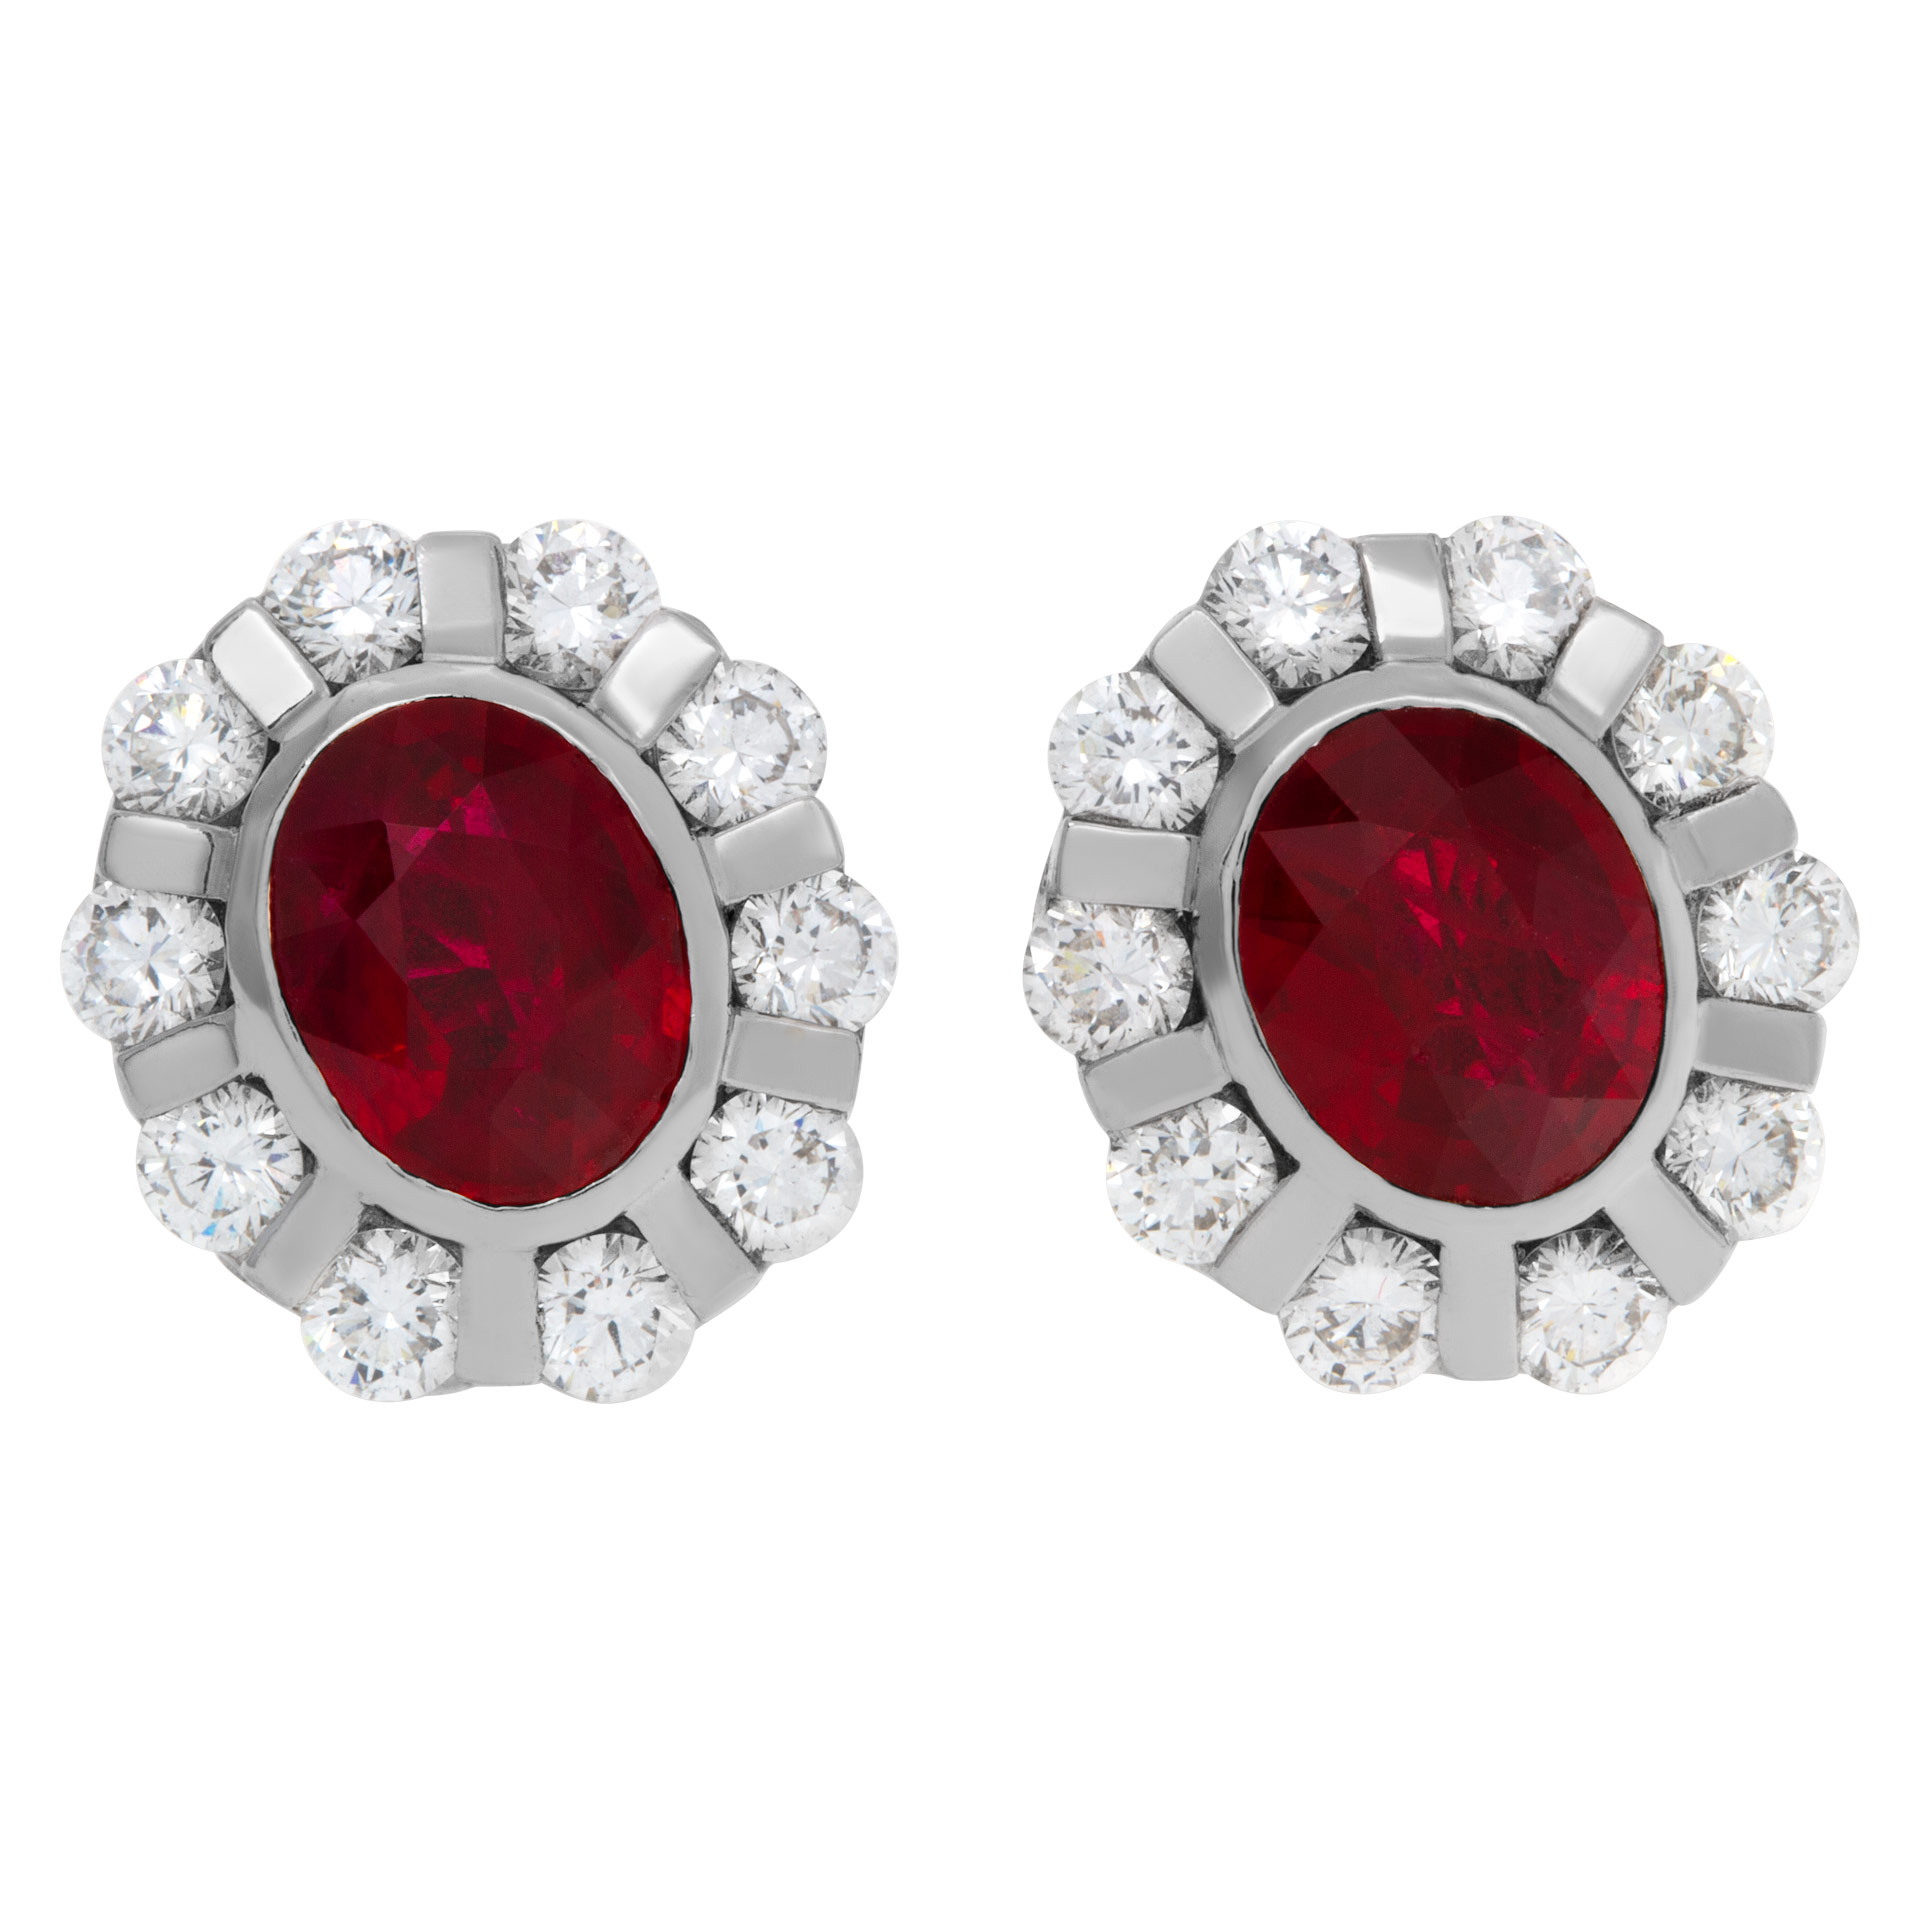 GIA certified approximately 6 carat ruby cufflinks with 2 carats in diamonds